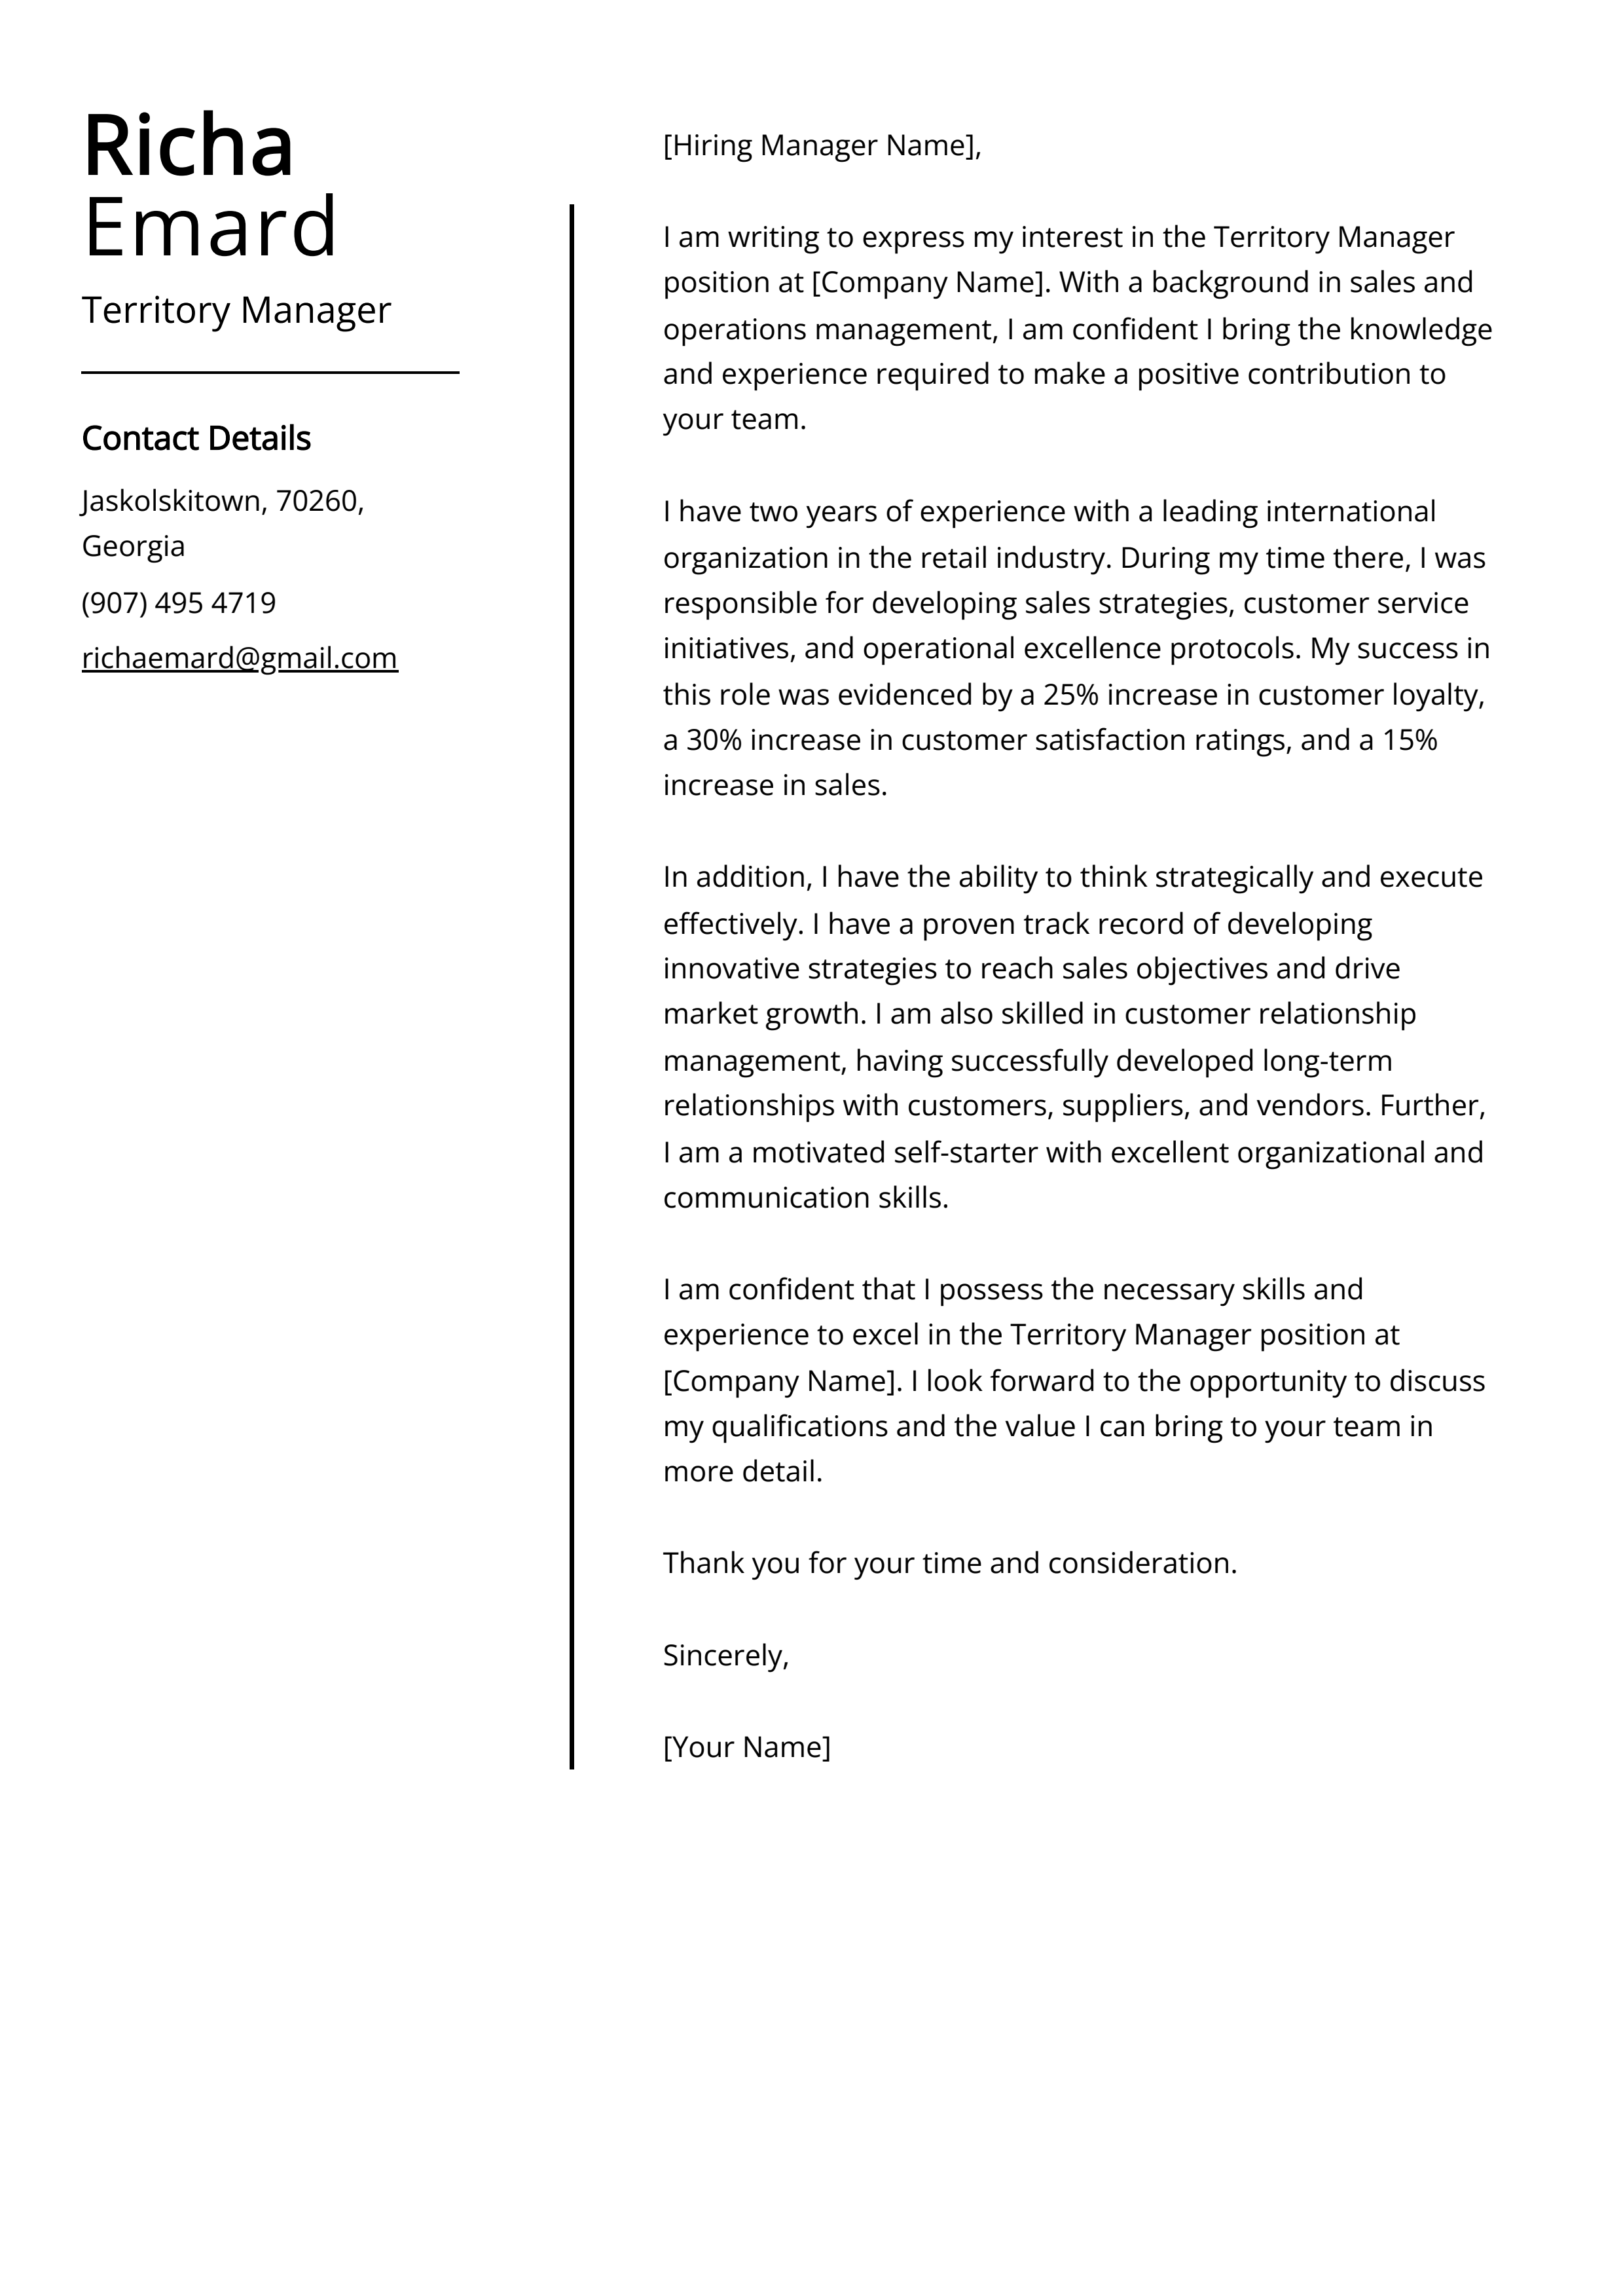 Territory Manager Cover Letter Example